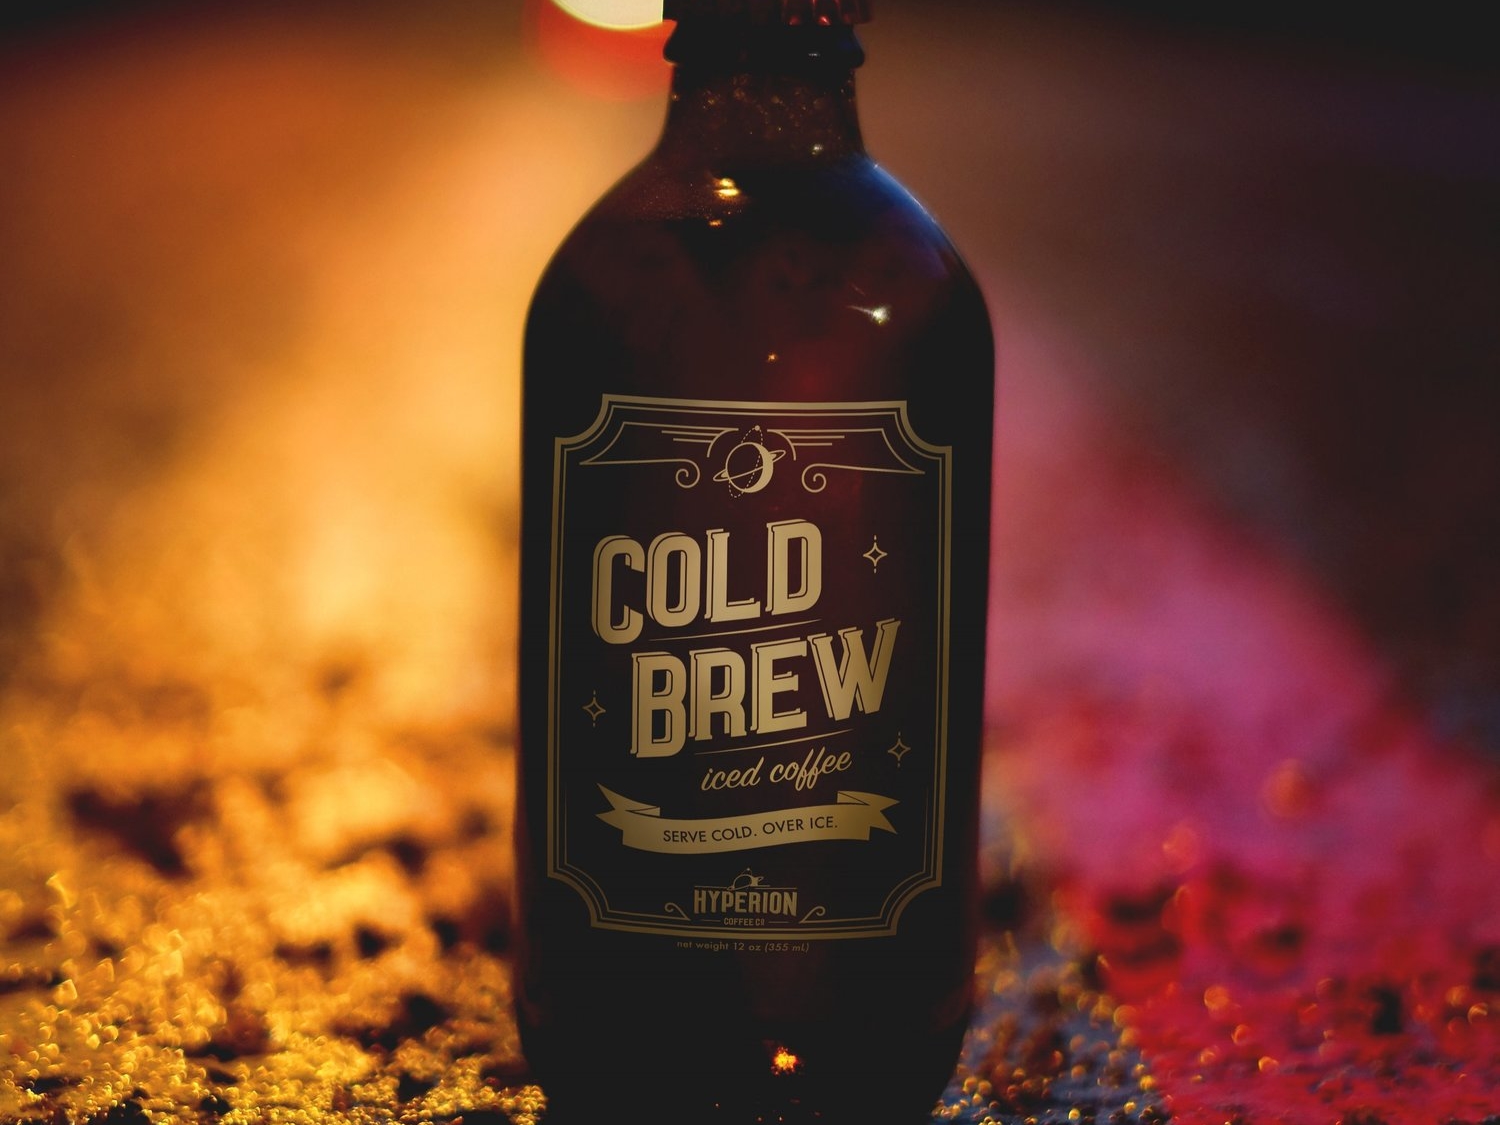 Download Cold Brew Mockup by Erica Rae on Dribbble